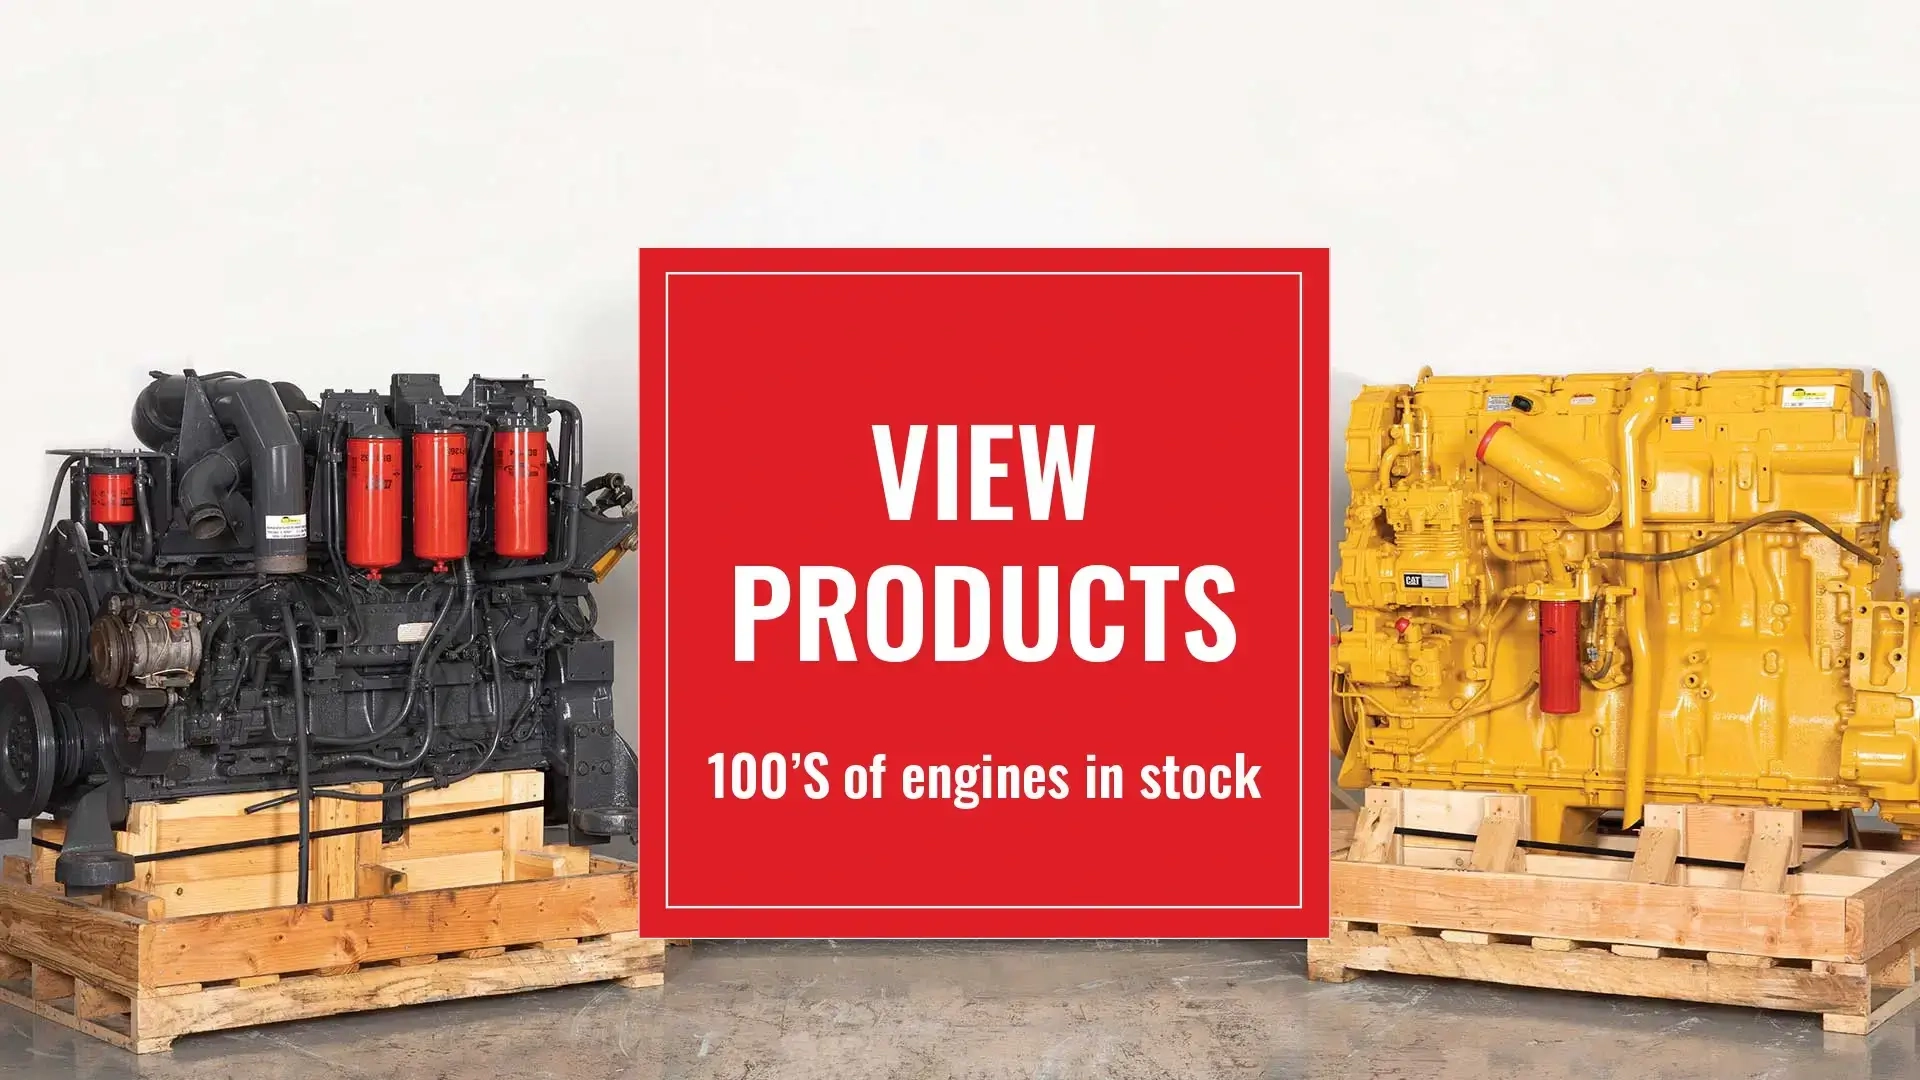 button to view products and two engines